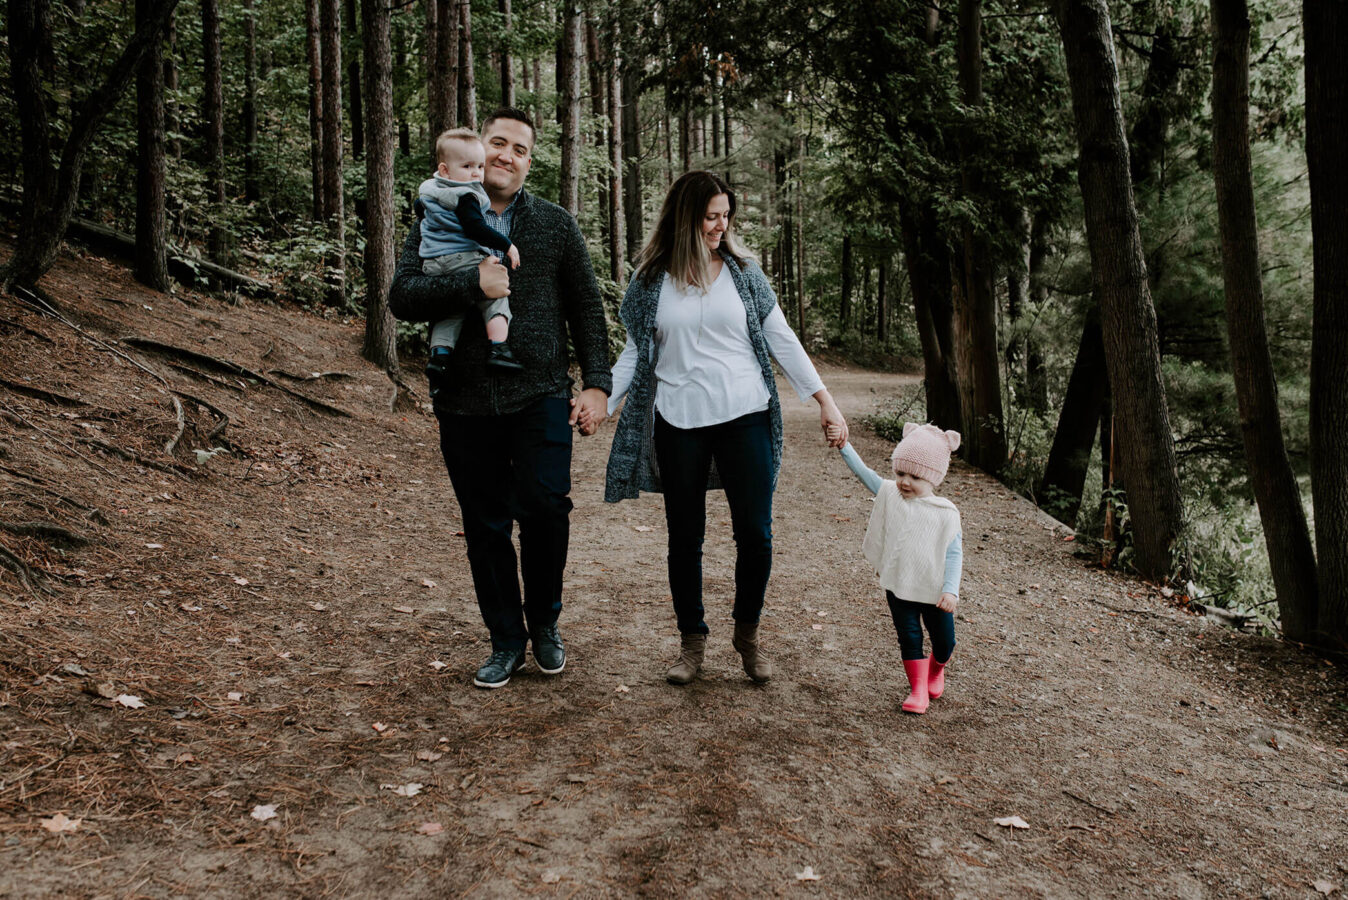 A family of four walking during a family photo session in a forest